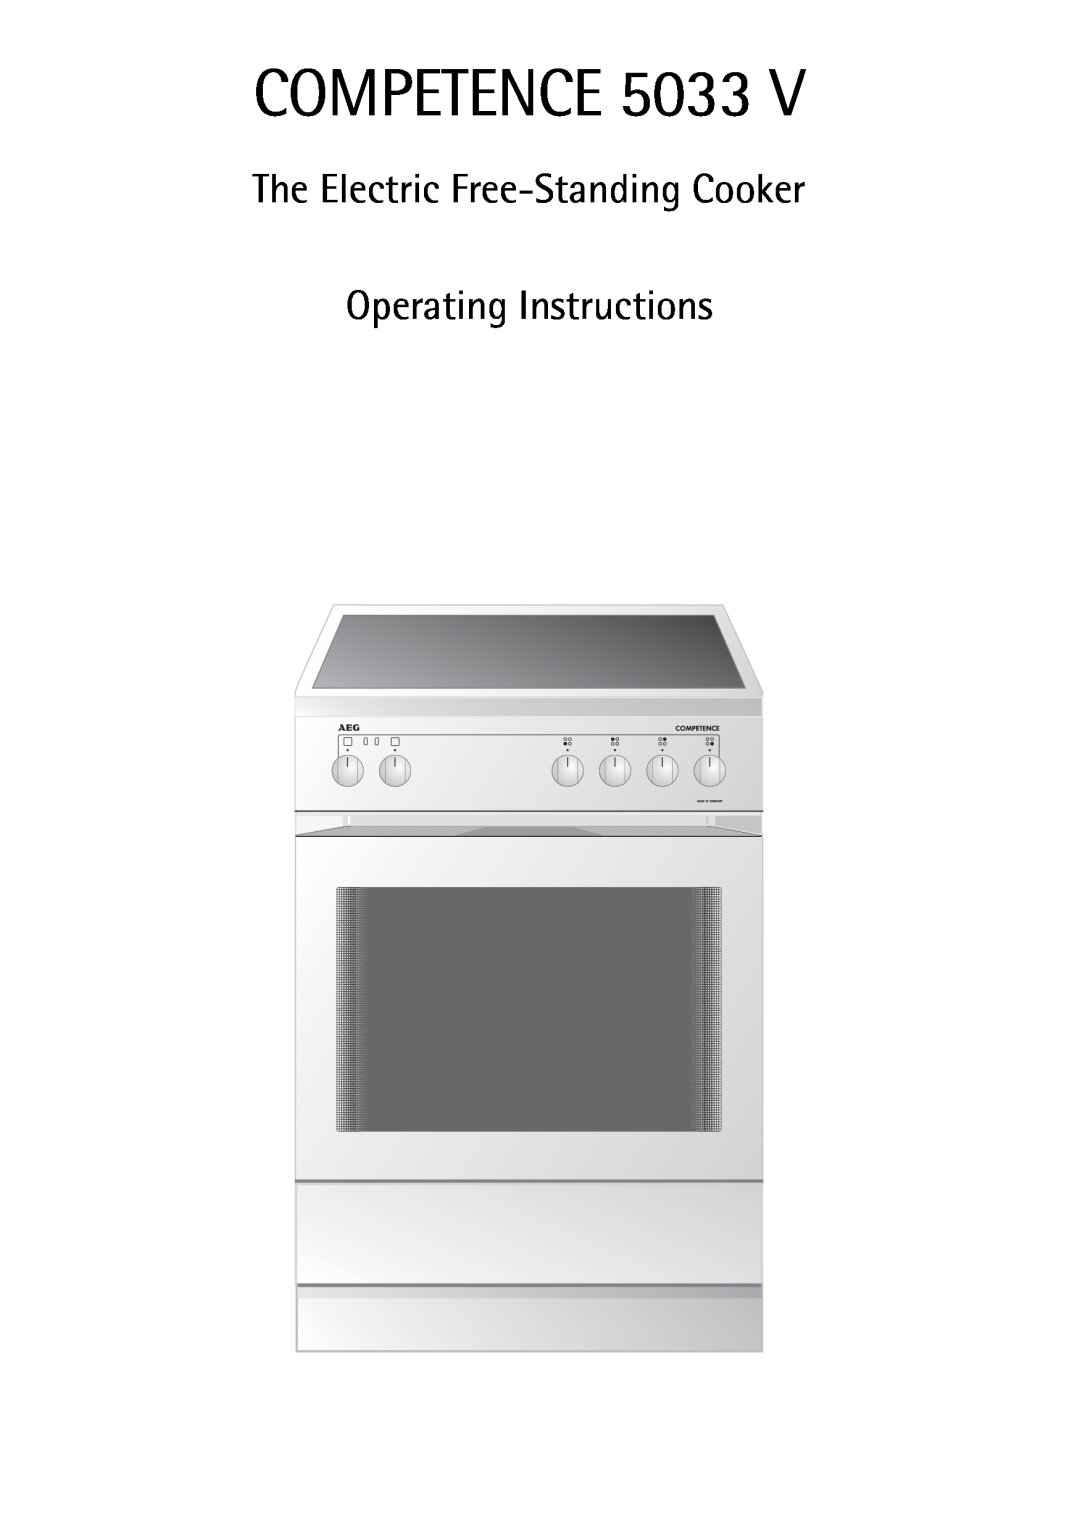 AEG 5033 V operating instructions Competence, The Electric Free-Standing Cooker Operating Instructions 